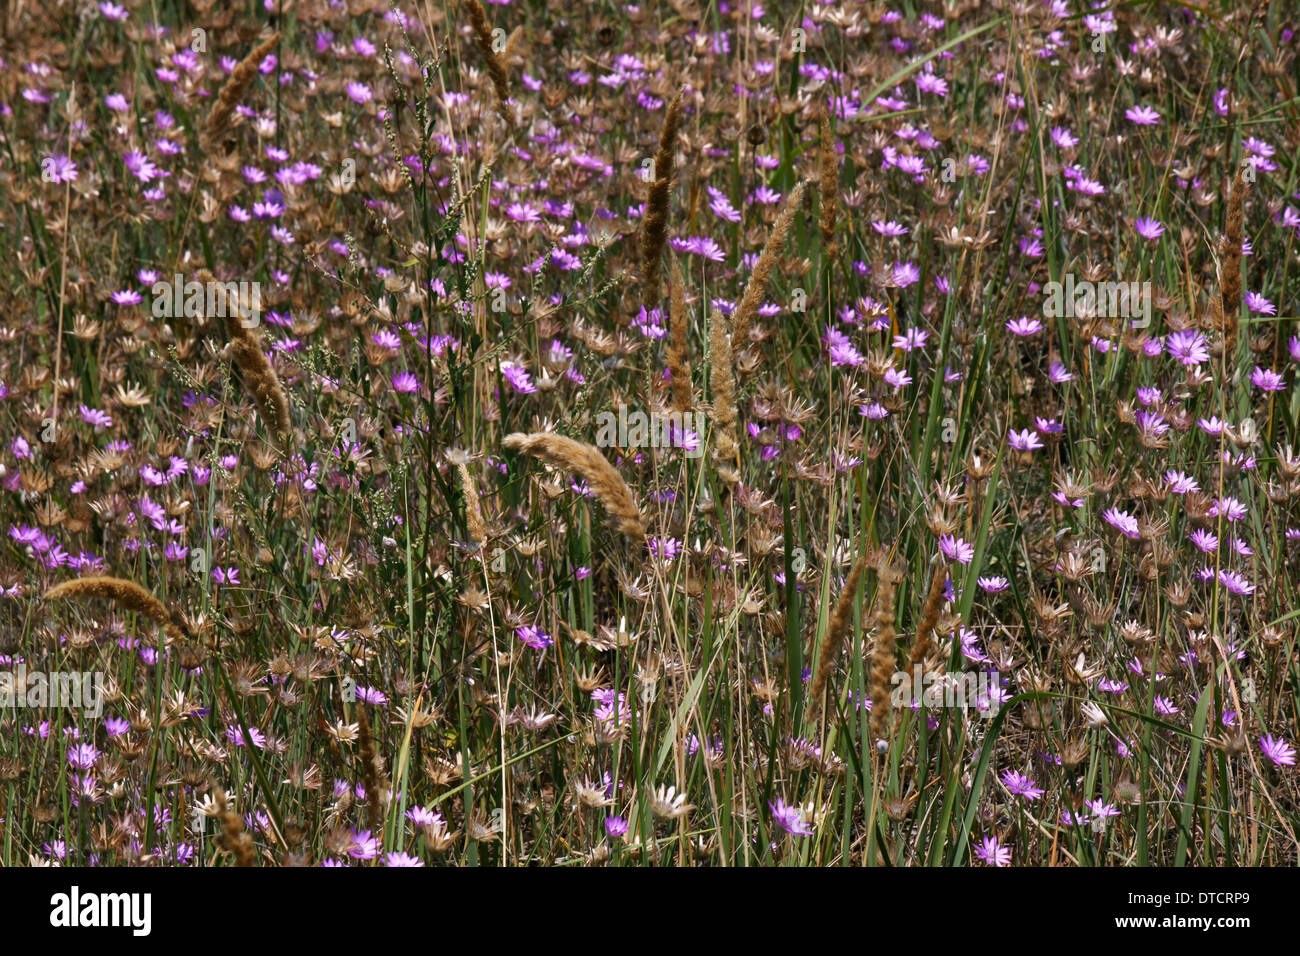 Helichrysum flowers on a meadow Stock Photo